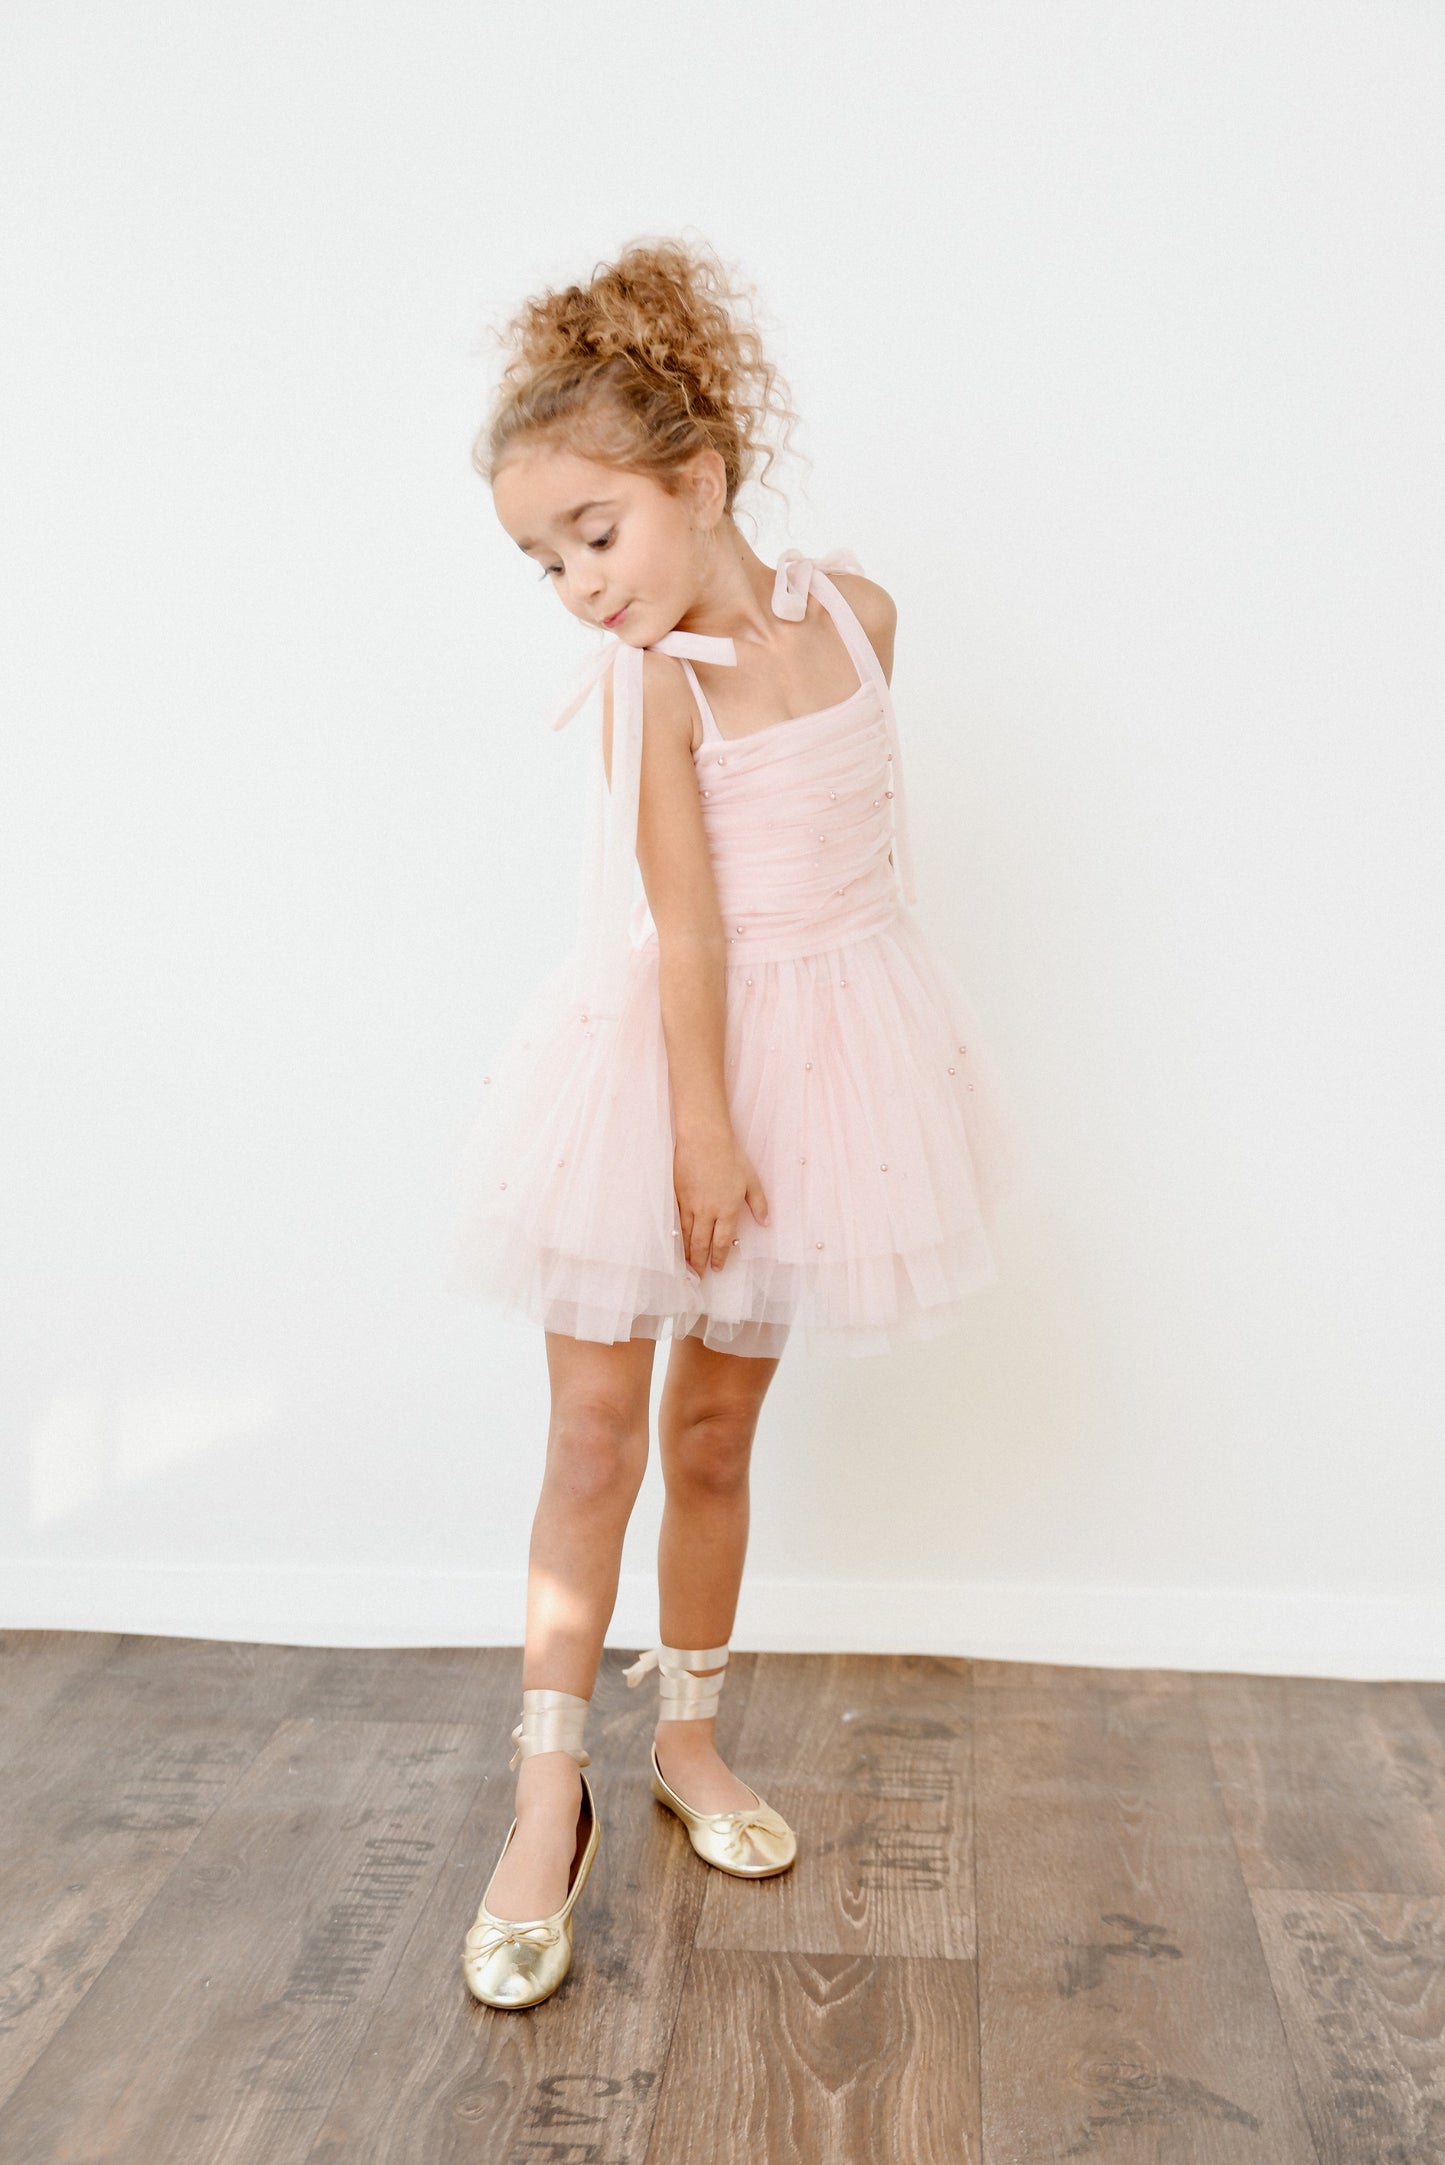 DOLLY® PEARL TULLE BALLERINA DRESS dollypink  ⚪